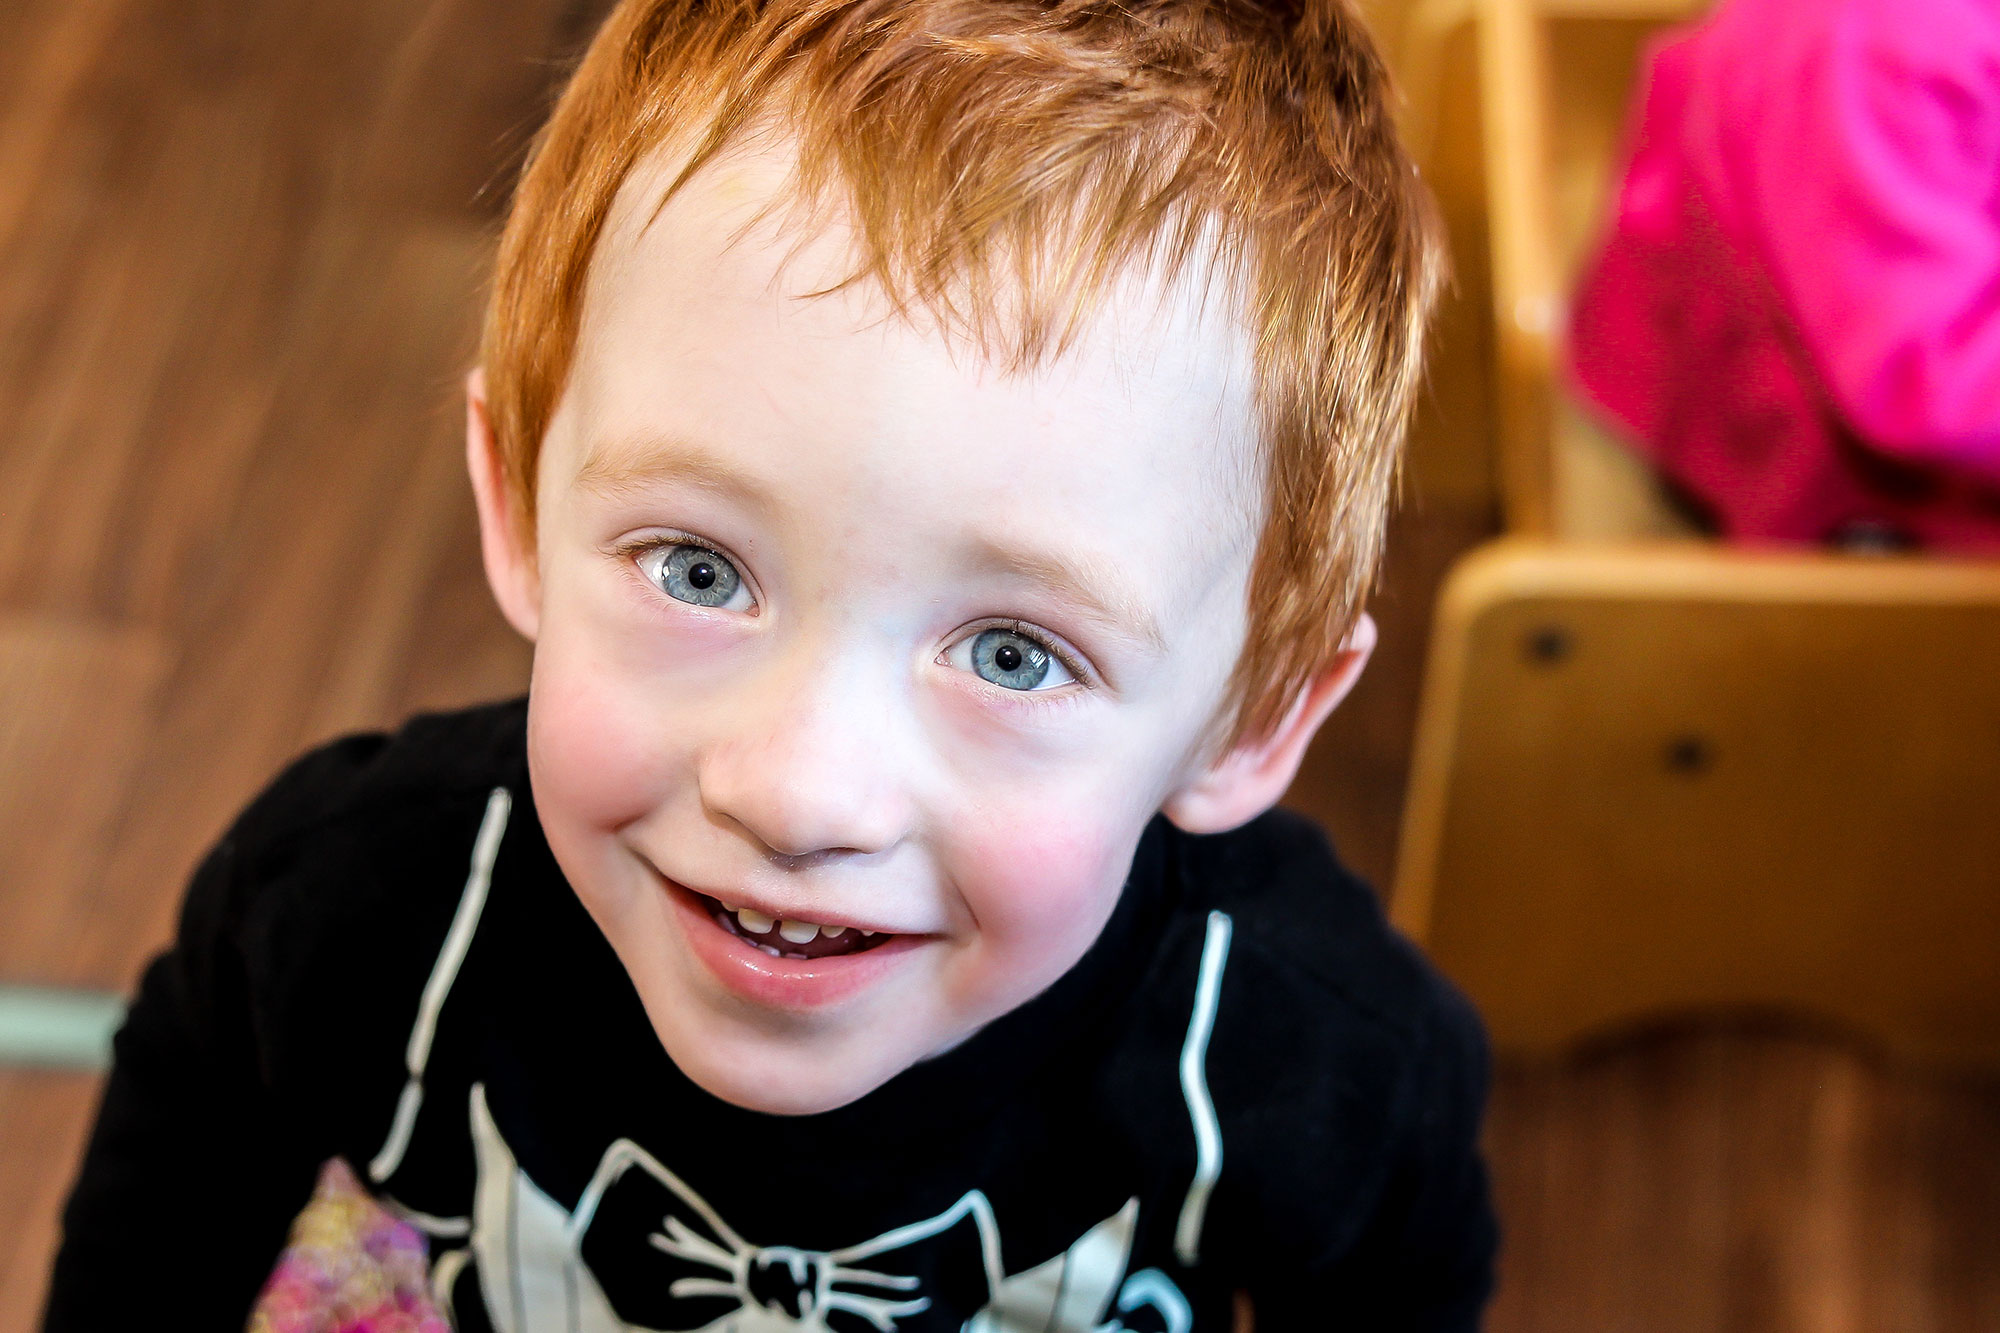 Red-headed little boy smiling at camera